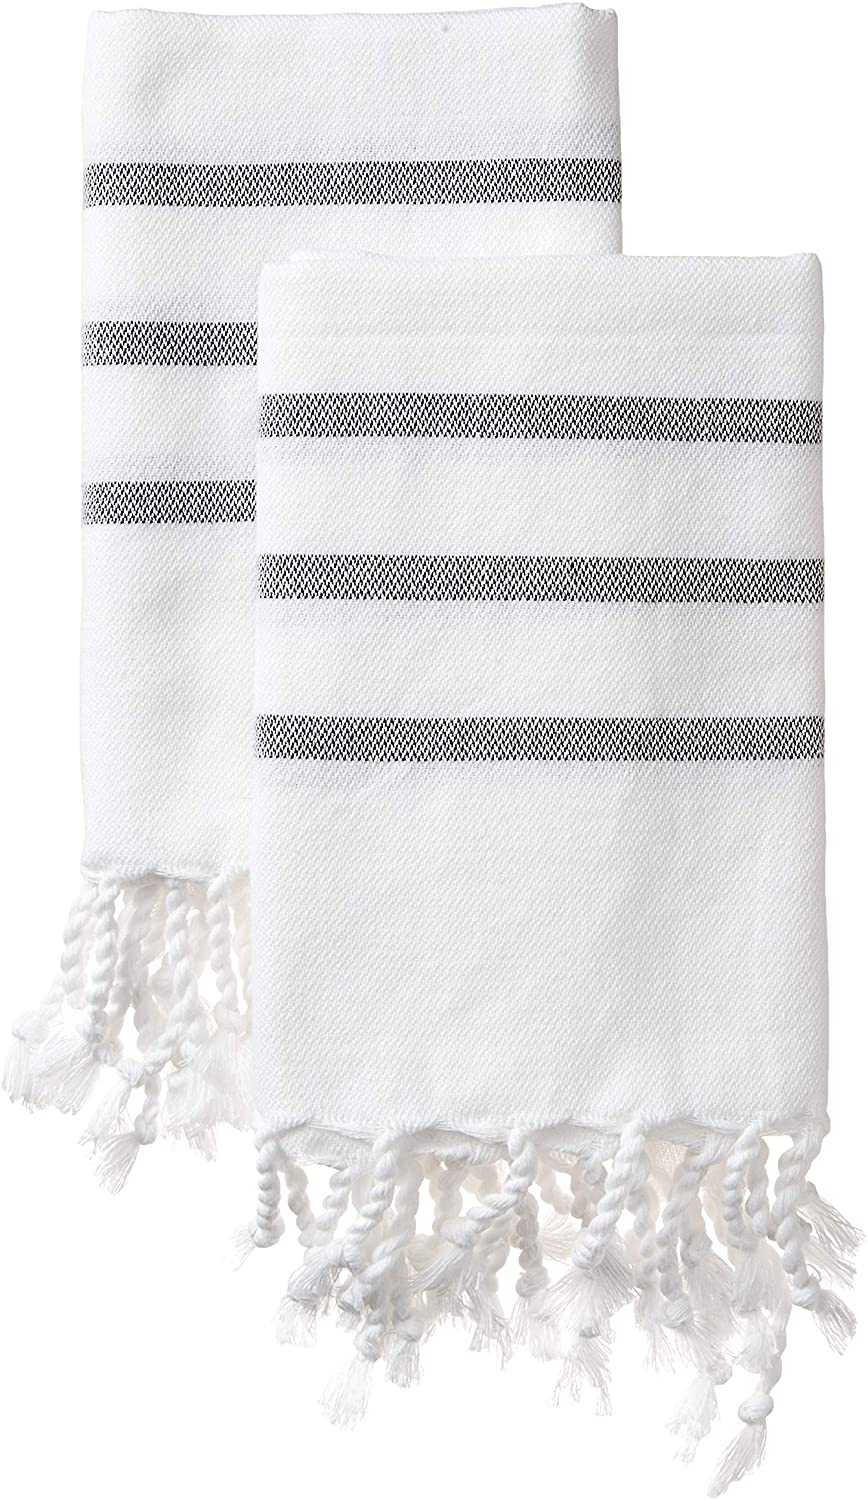 two light white towels with light gray lines and tassles